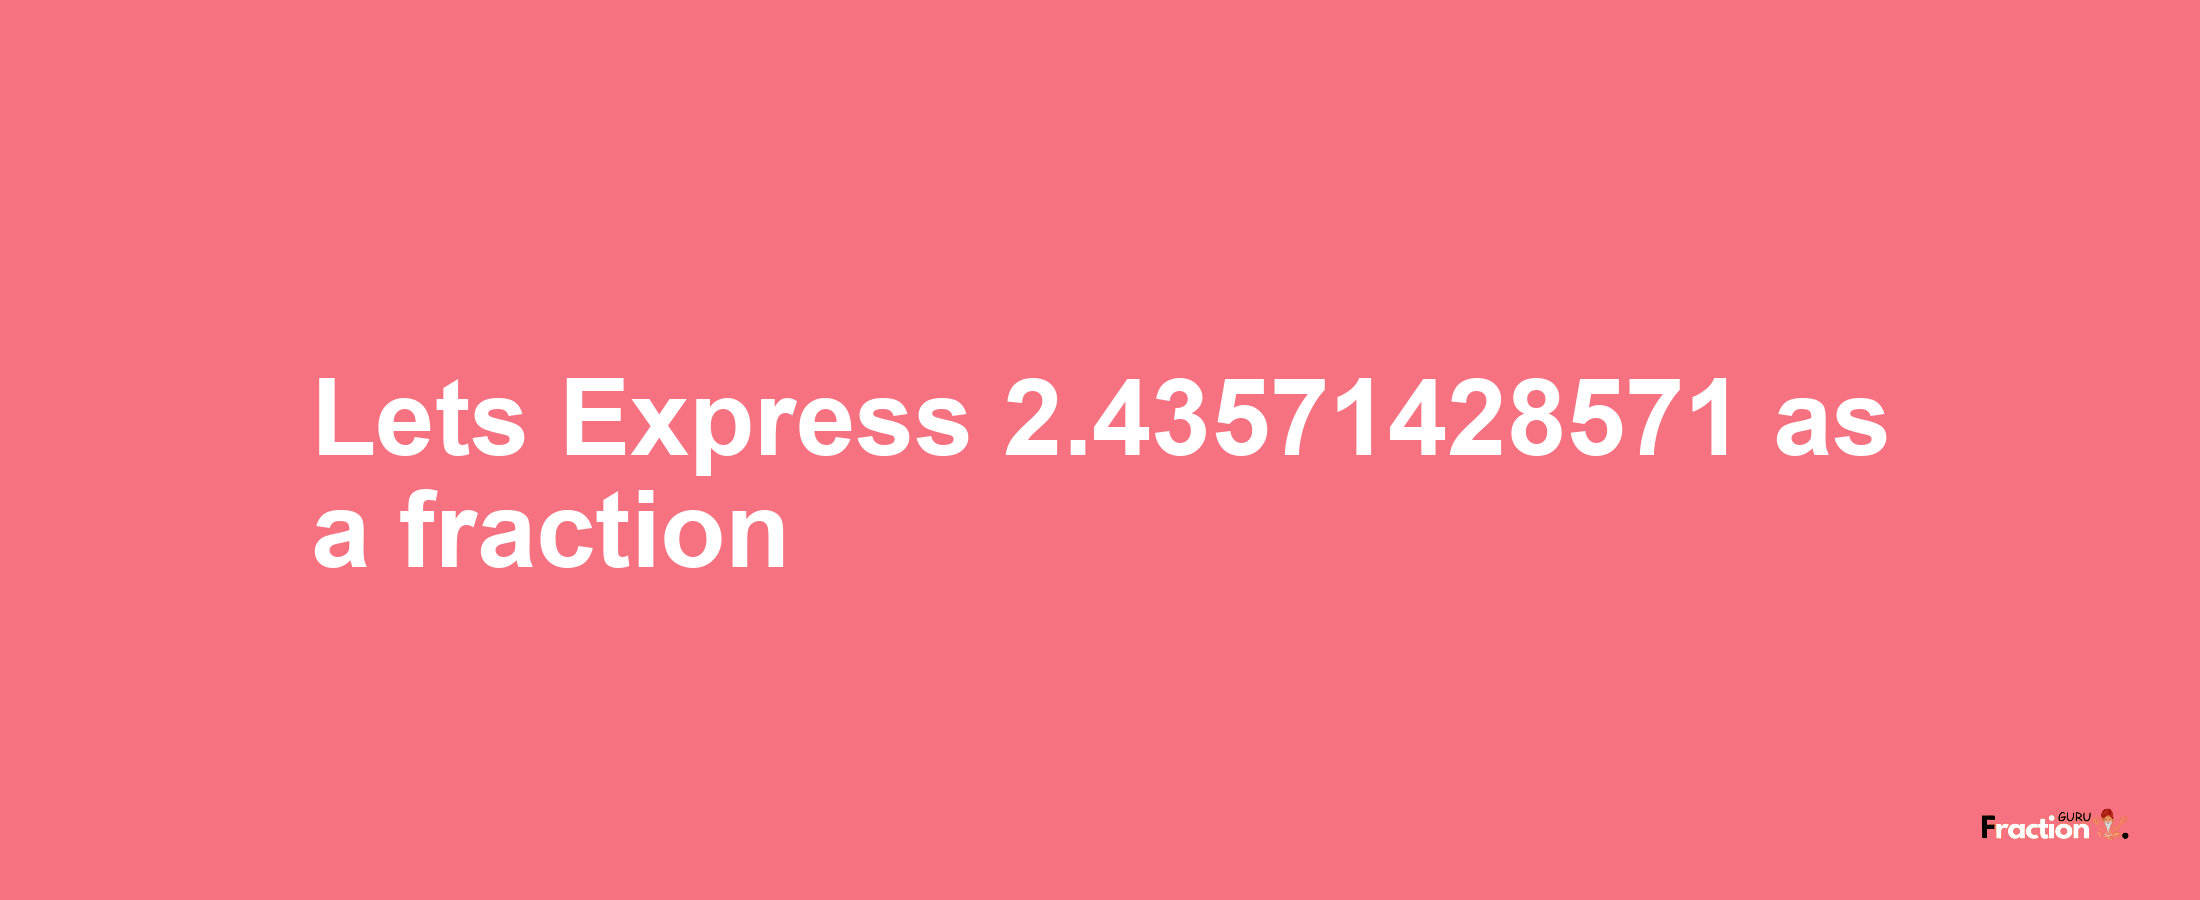 Lets Express 2.43571428571 as afraction